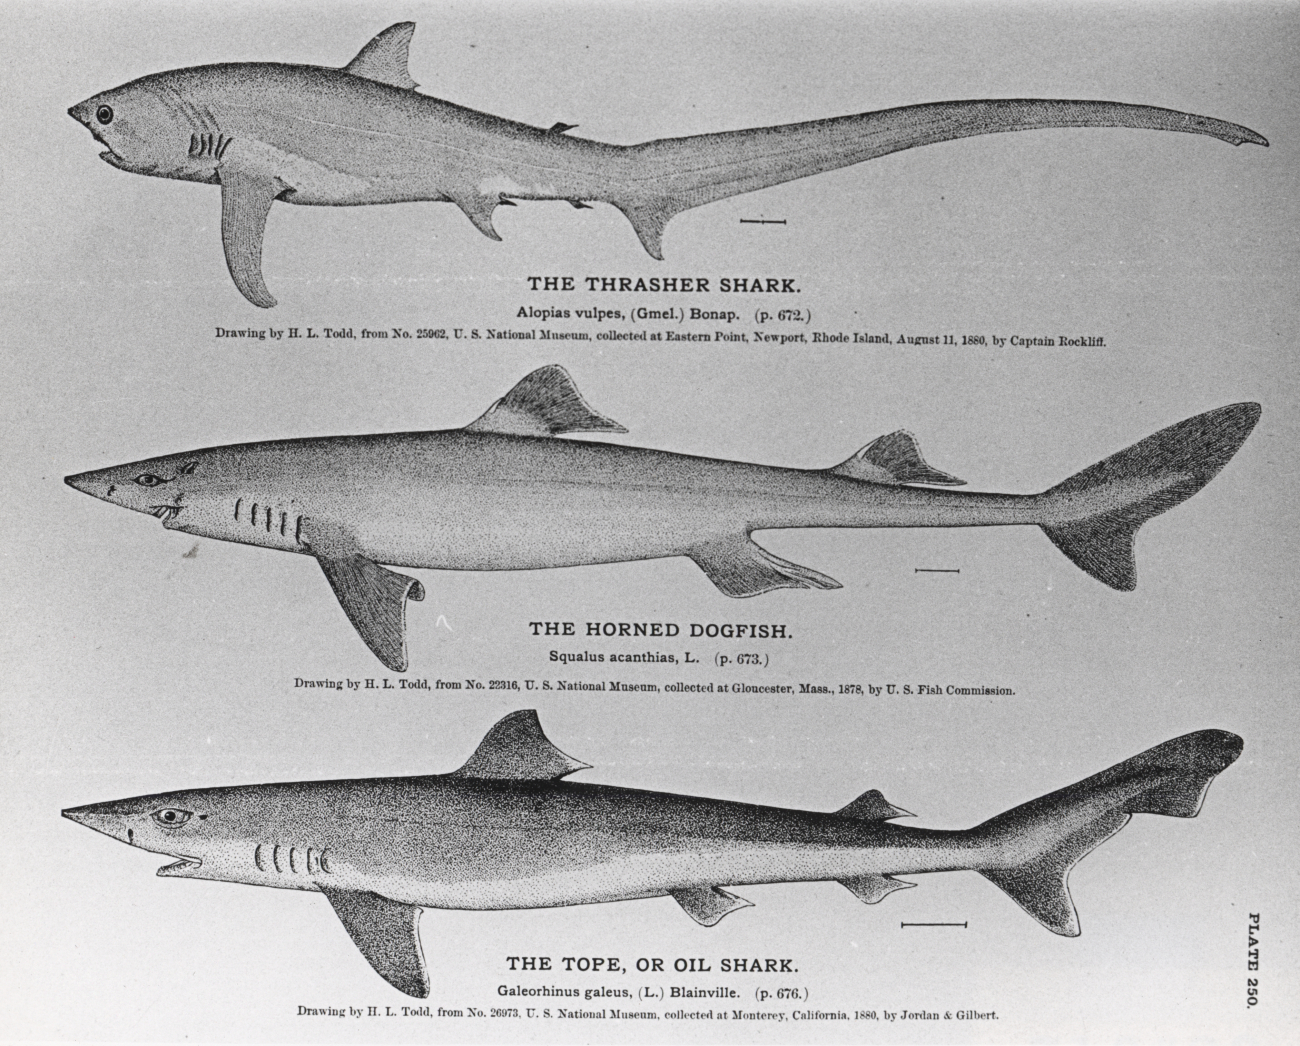 Drawings of the thrasher shark, Alopias vulpes, the horned dogfish, Squalusacanthias, and the tope, or oil shark, Galeorhinus galeus